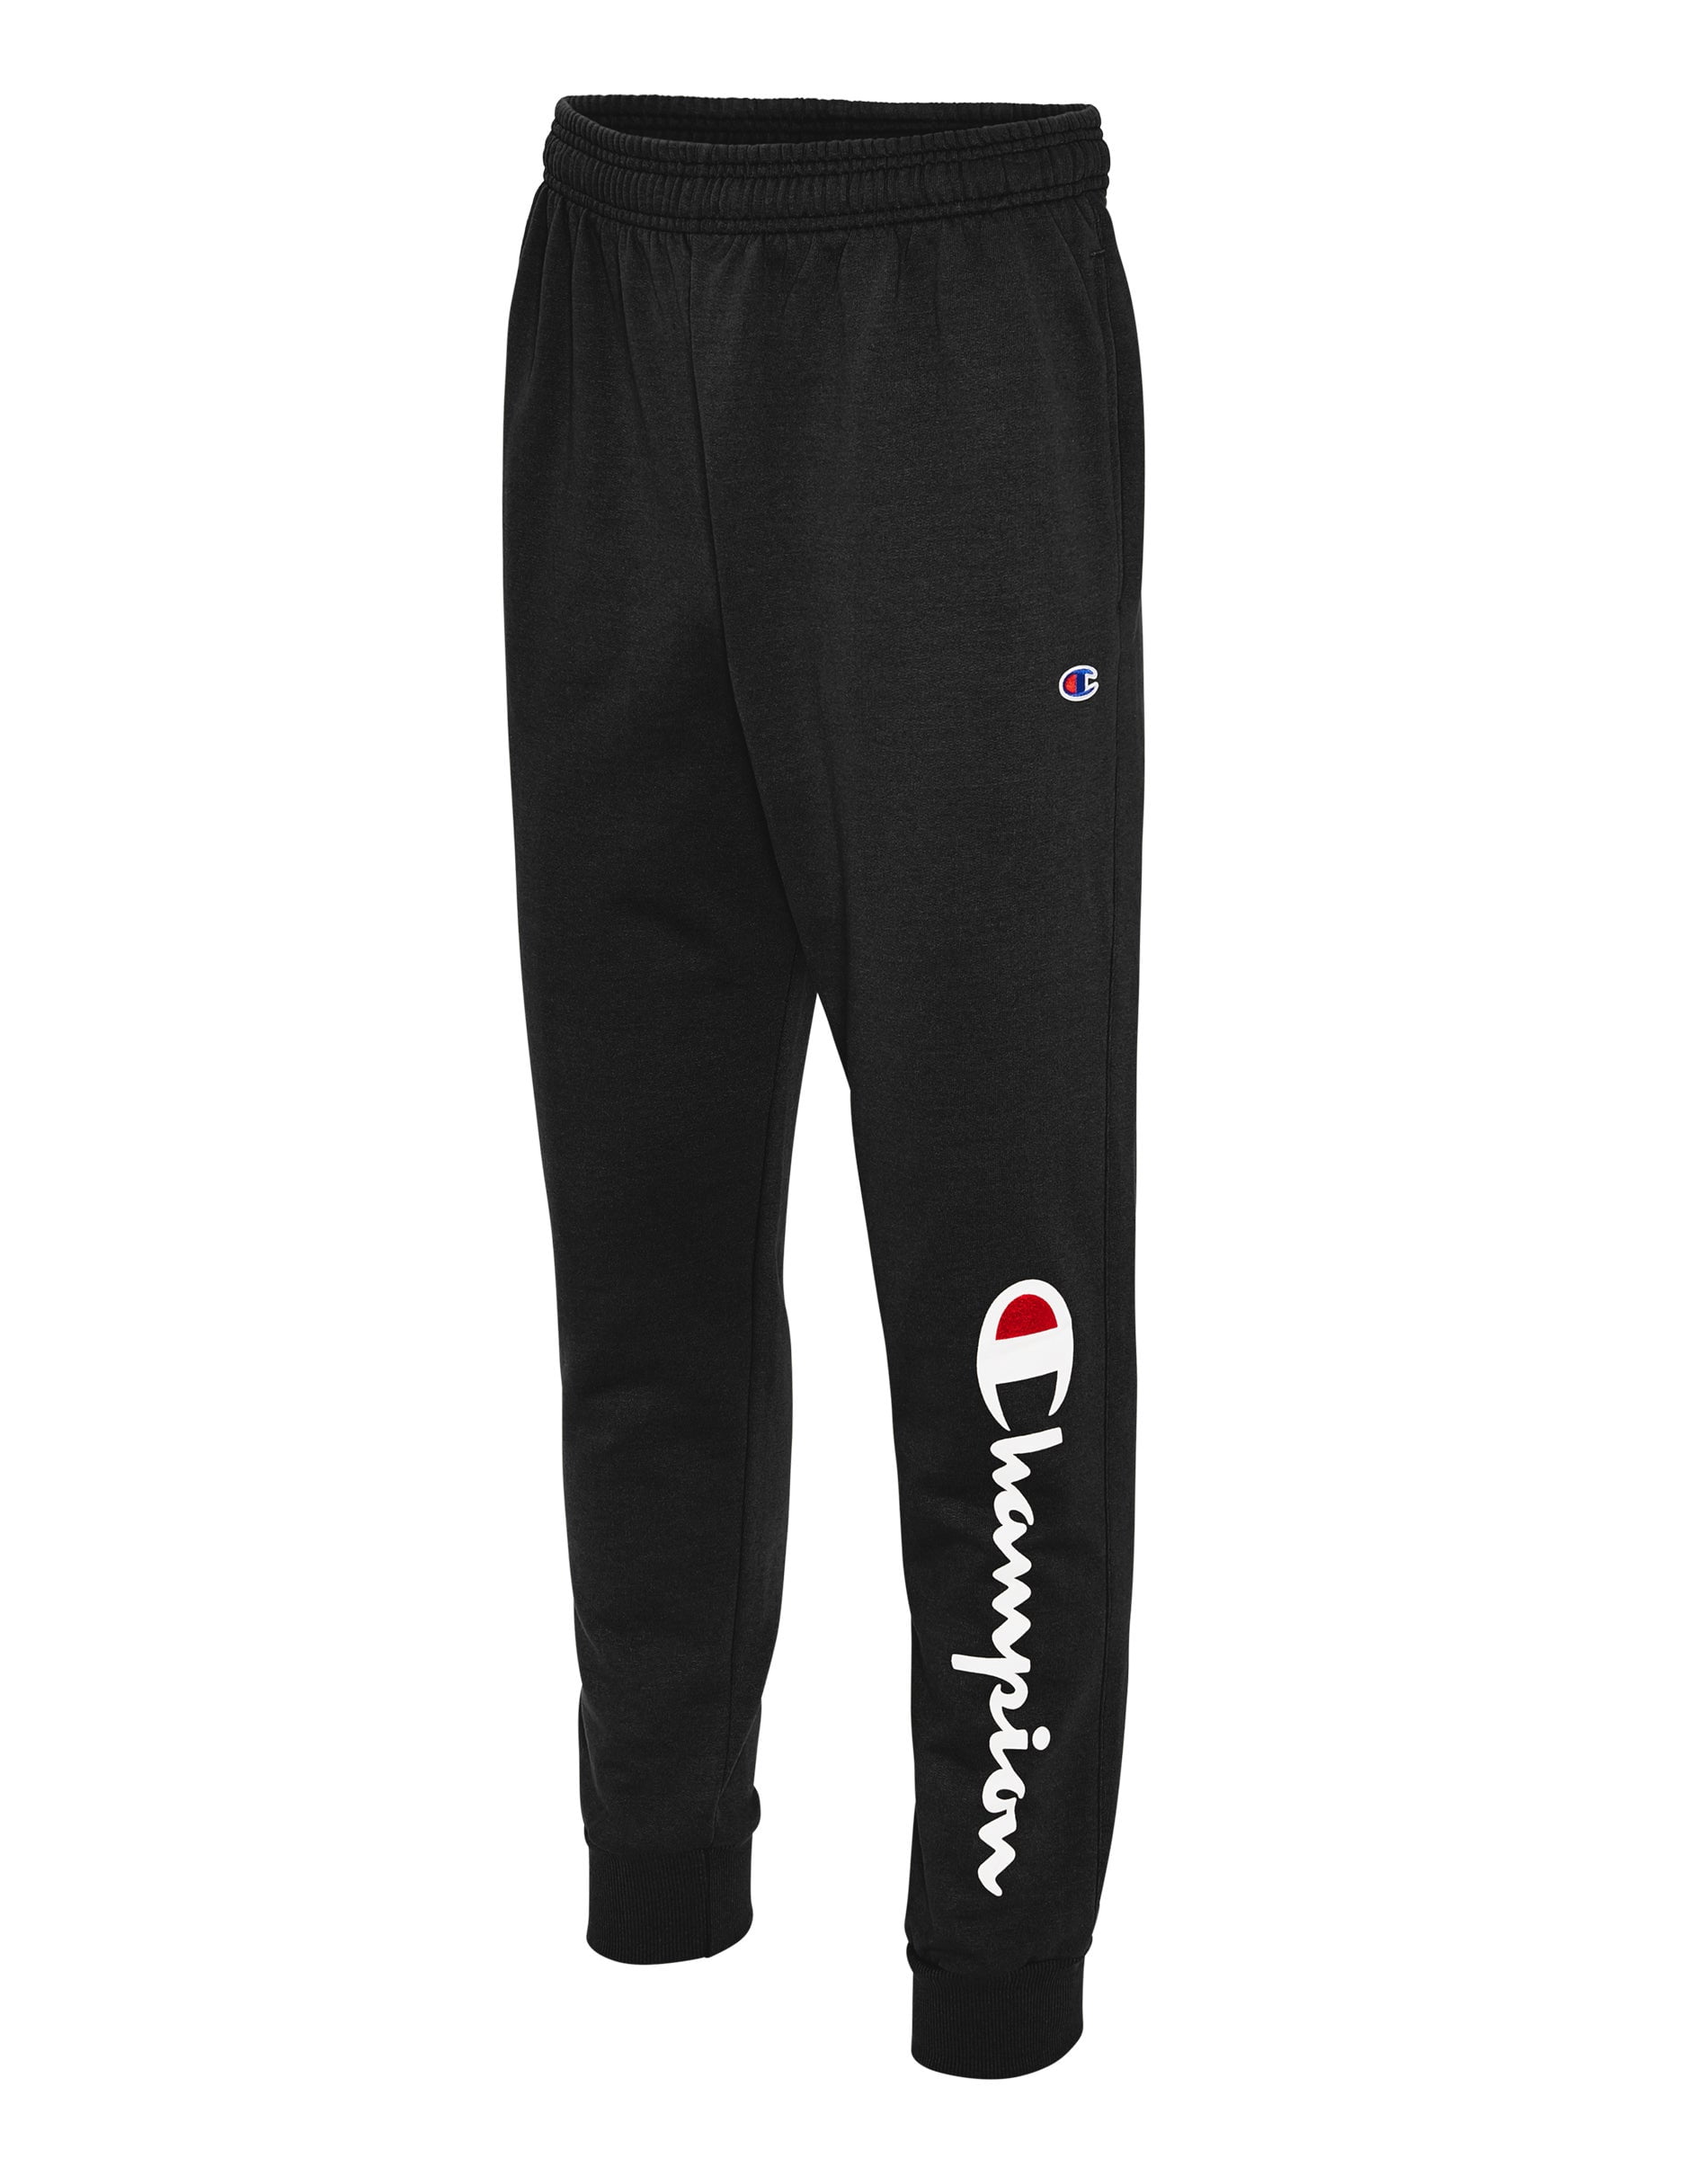 Champion Men's Powerblend Graphic Relaxed Bottom Pant - Walmart.com